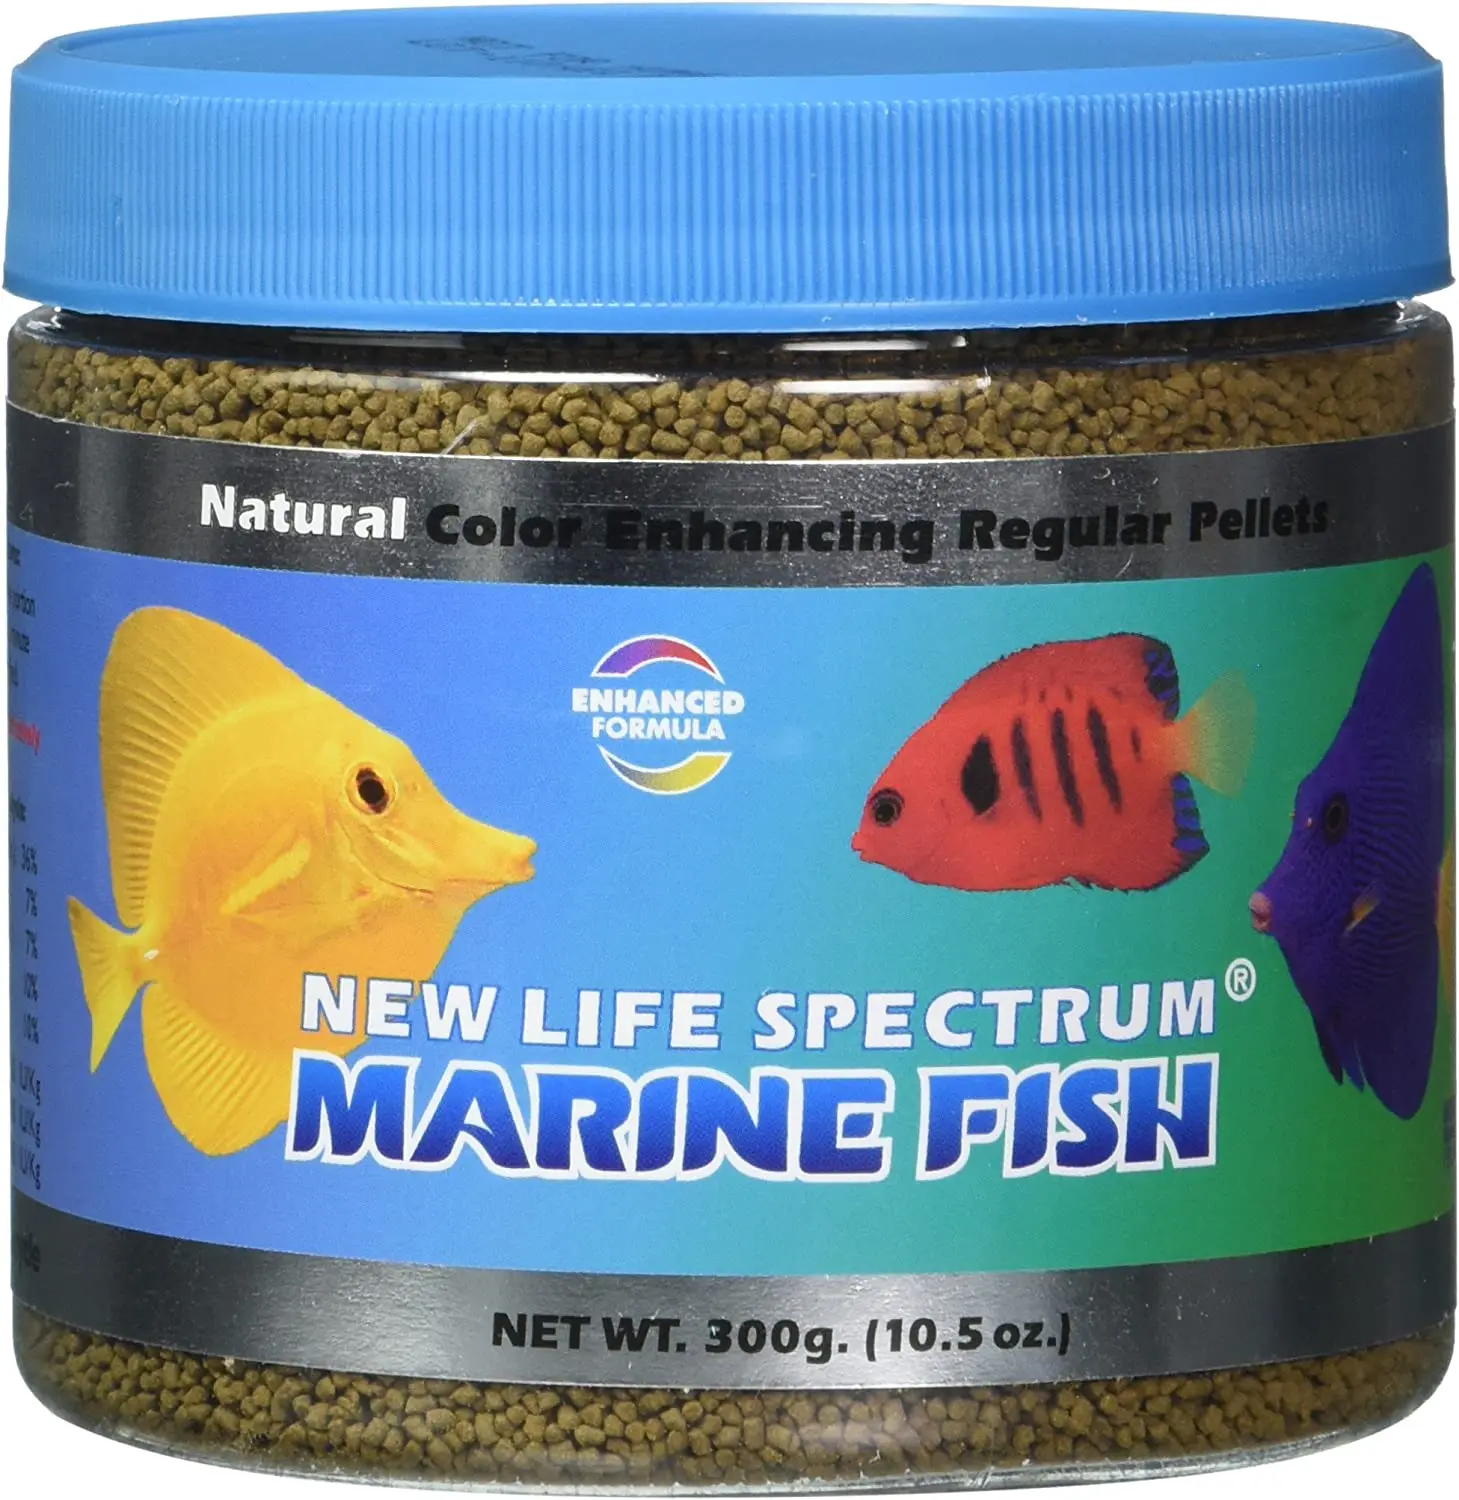 A clear plastic tub with a blue label with tropical fish and a blue screw top.